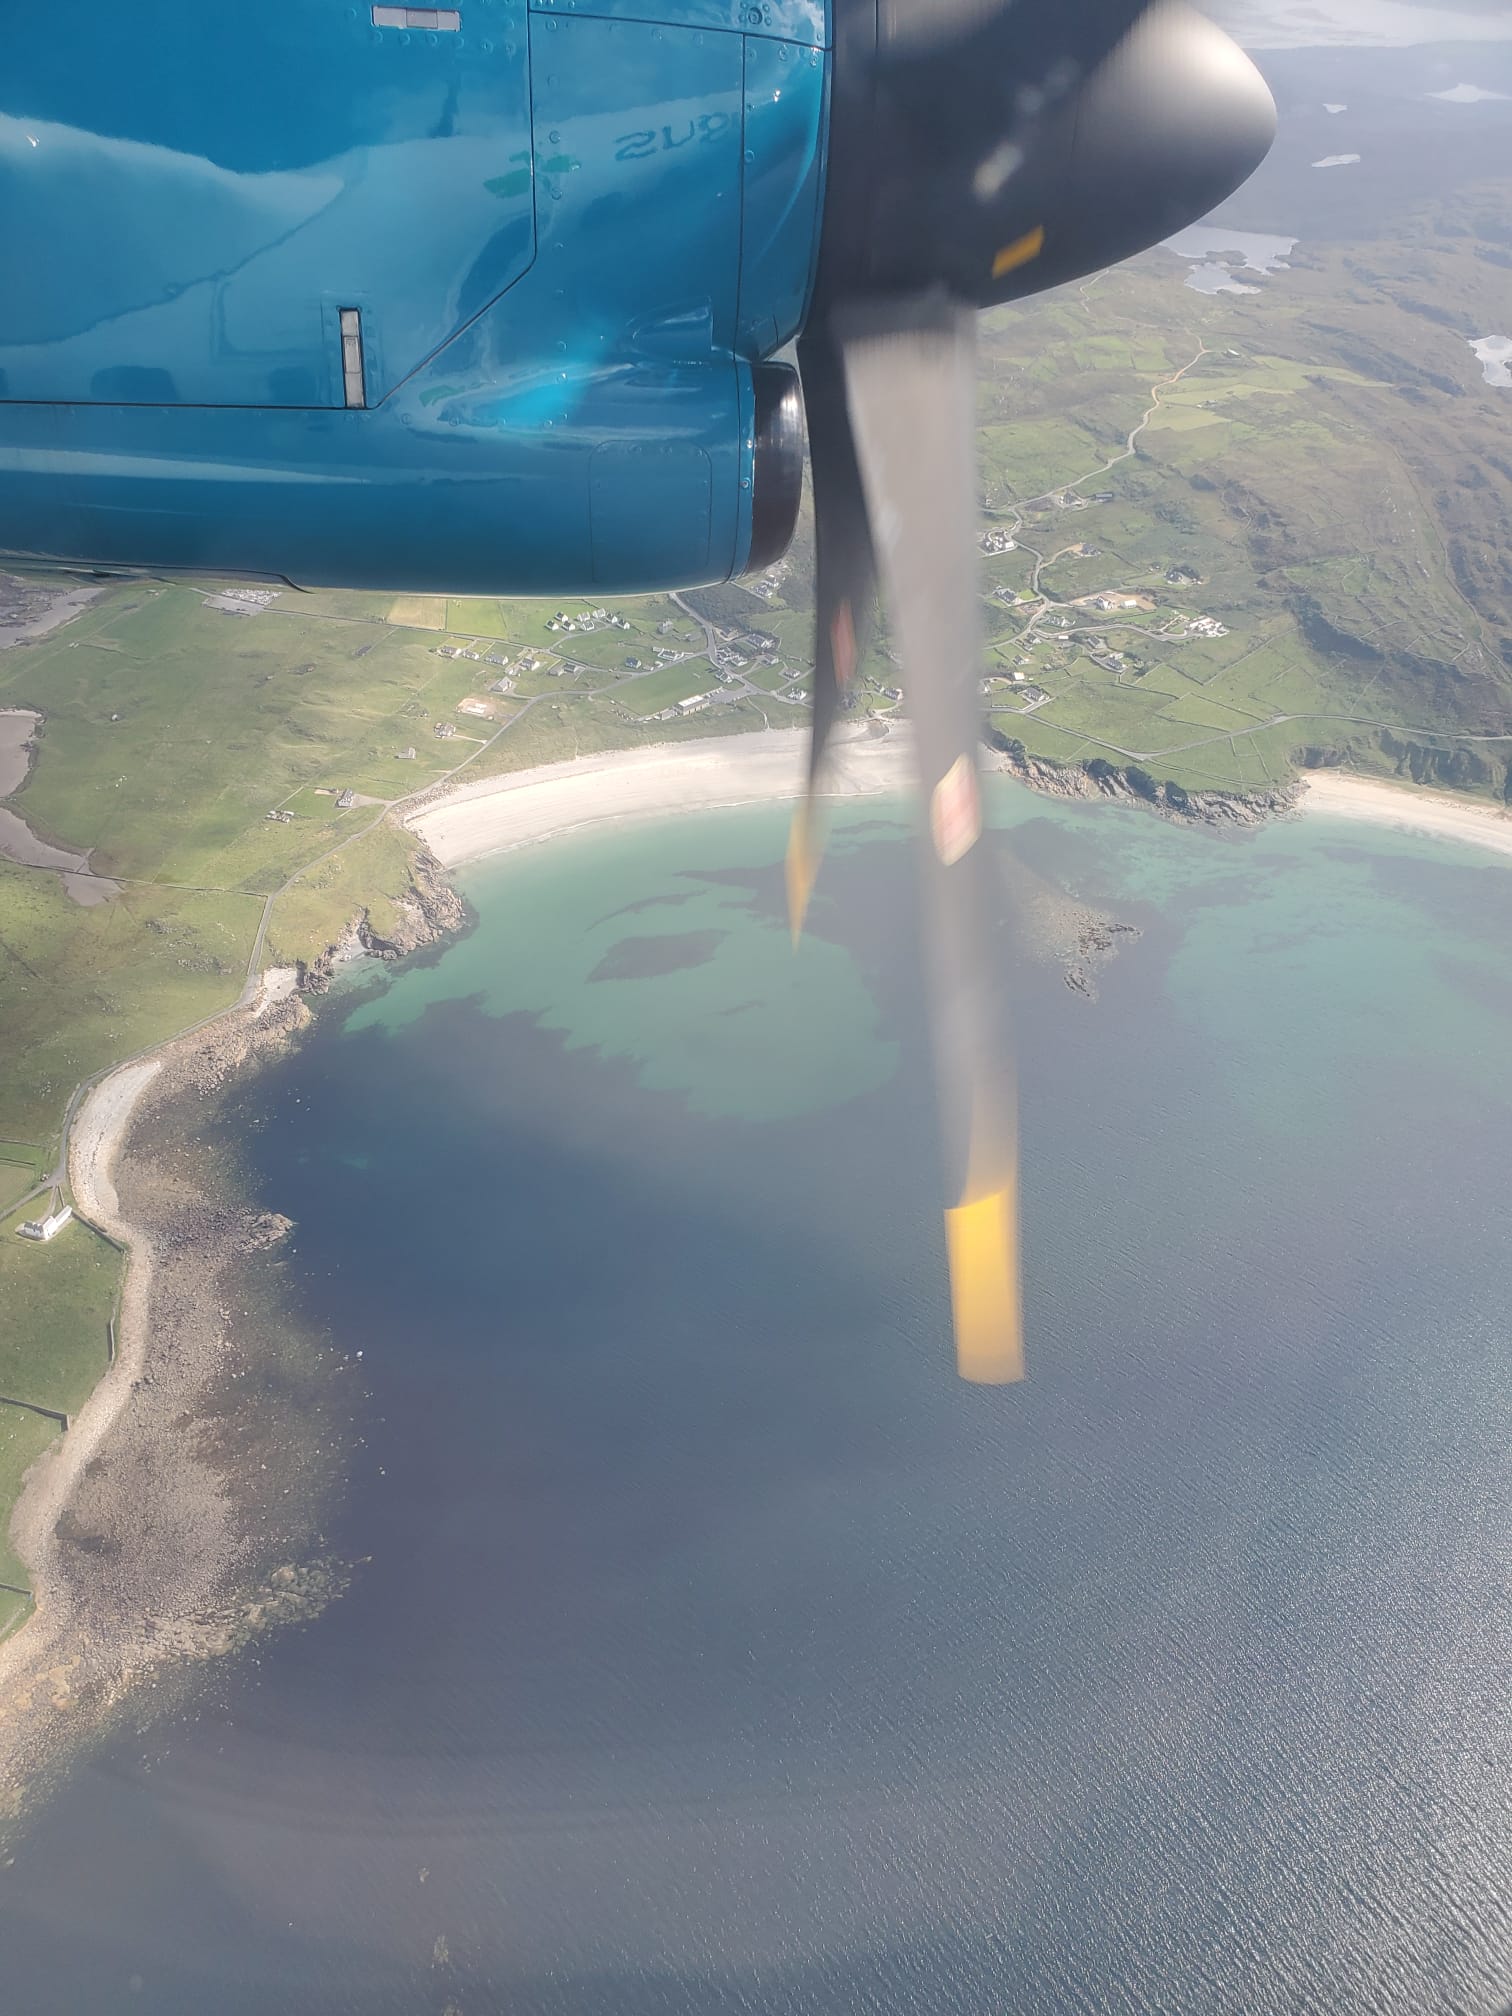 On approach to Donegal Airport. Credit: Shane O'Brien